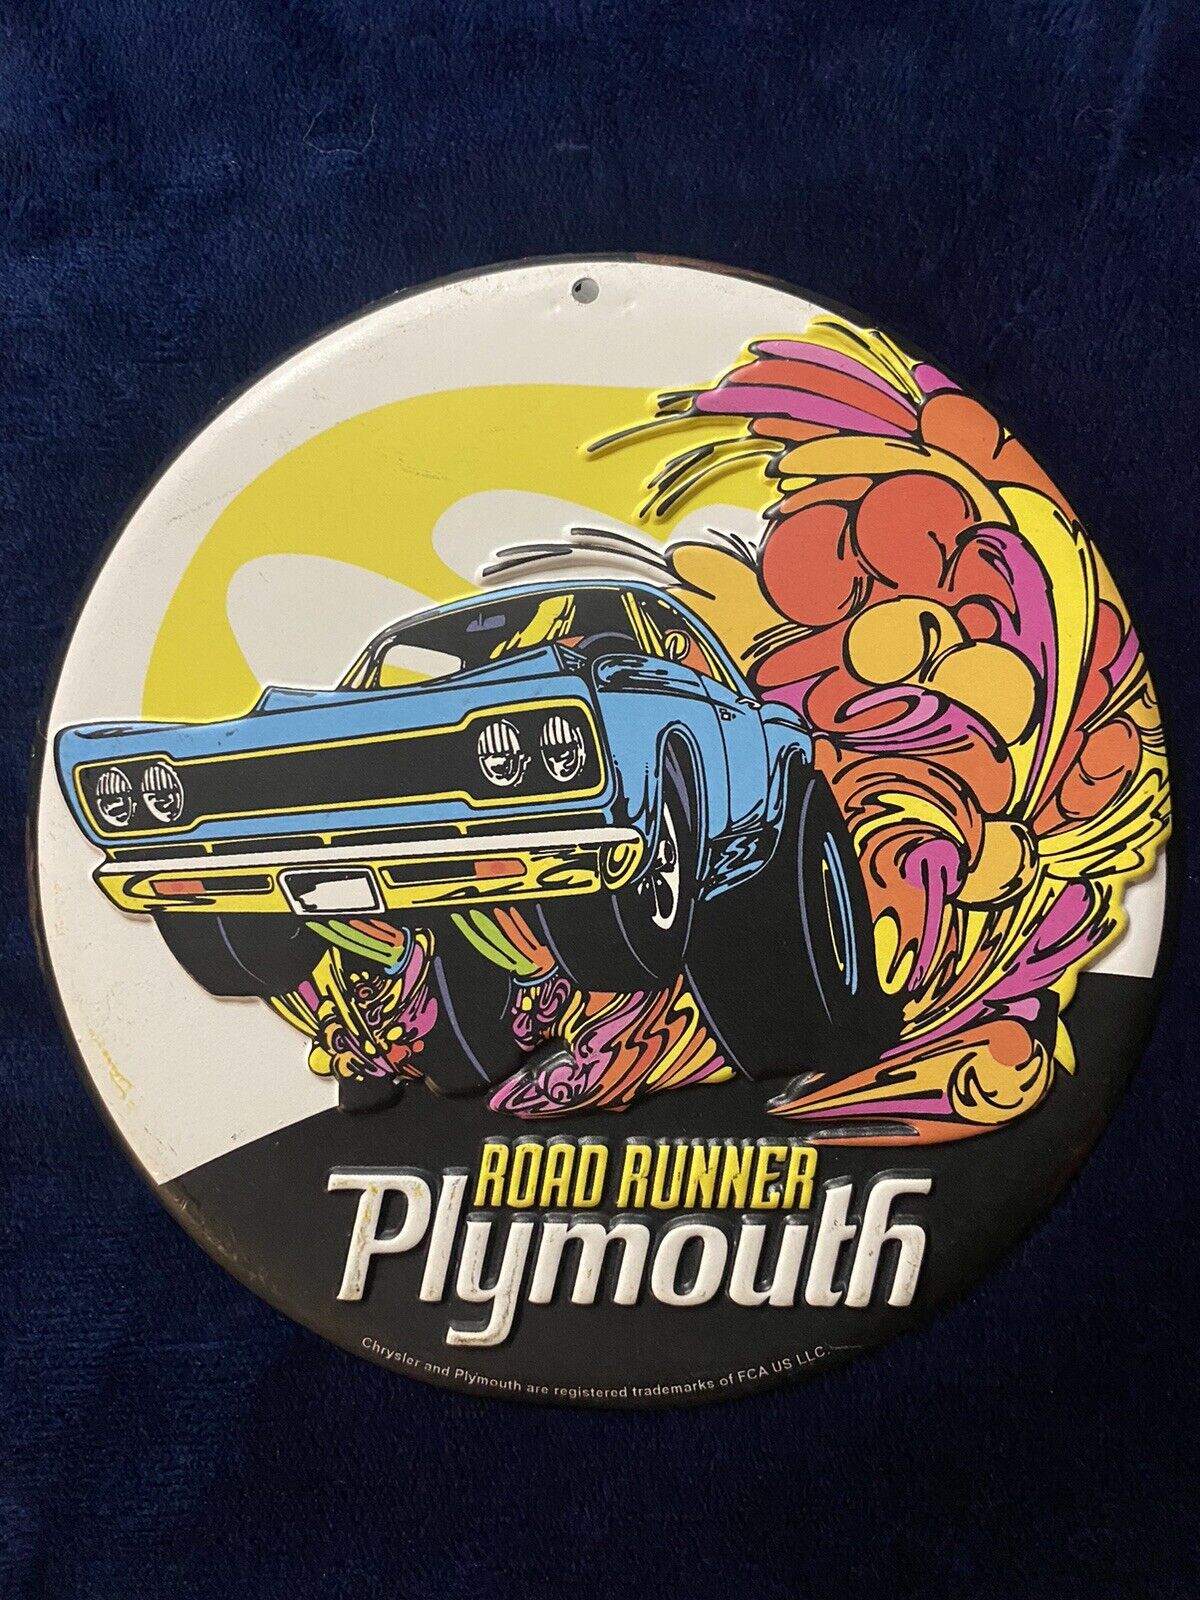 Plymouth - ROAD RUNNER  - Distressed Metal Sign - MOPAR